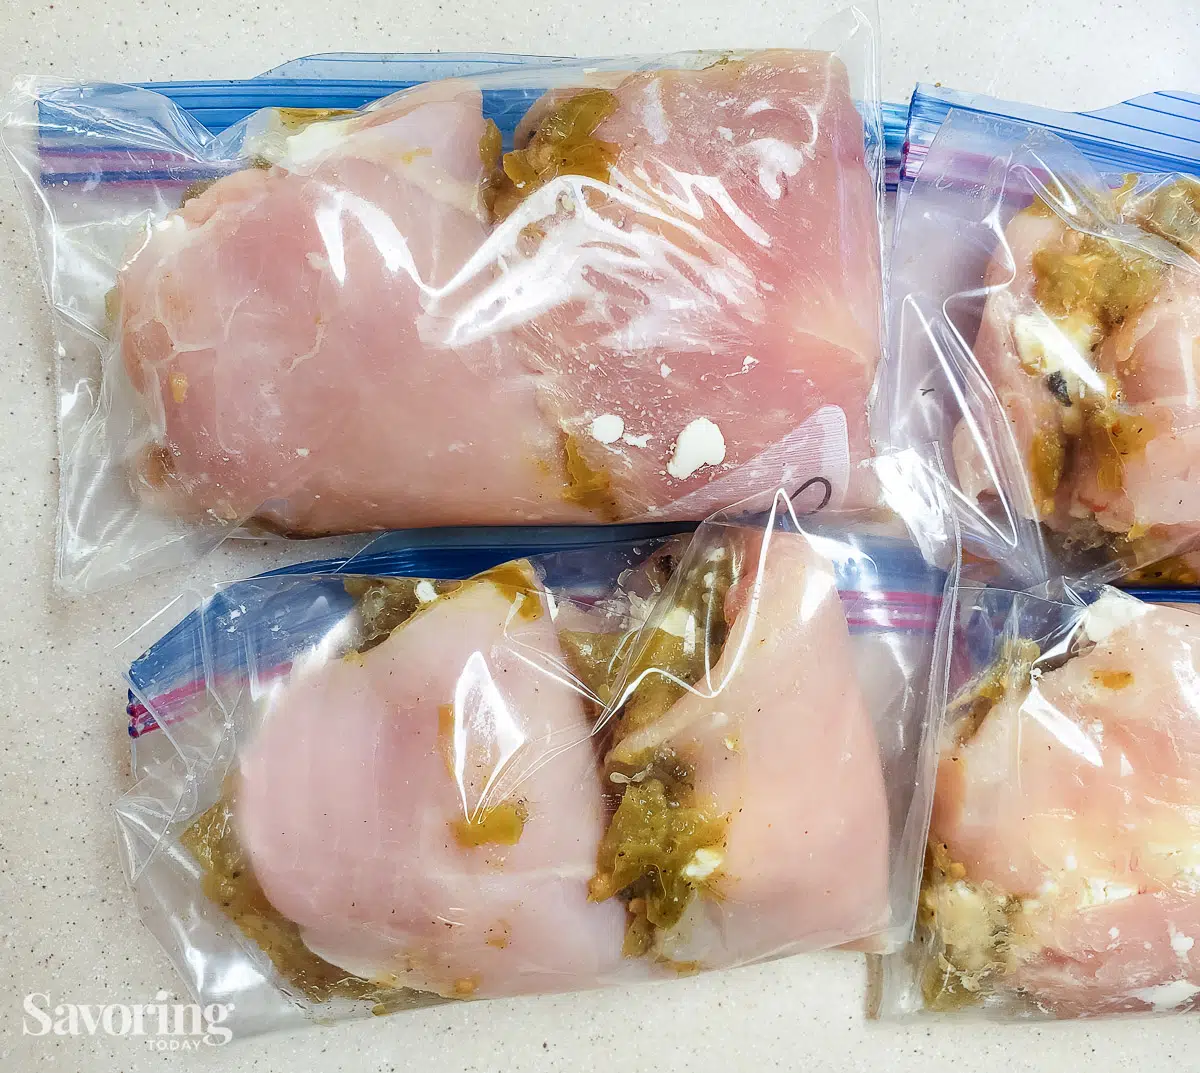 stuffed chicken in a zip-type bag for freezing